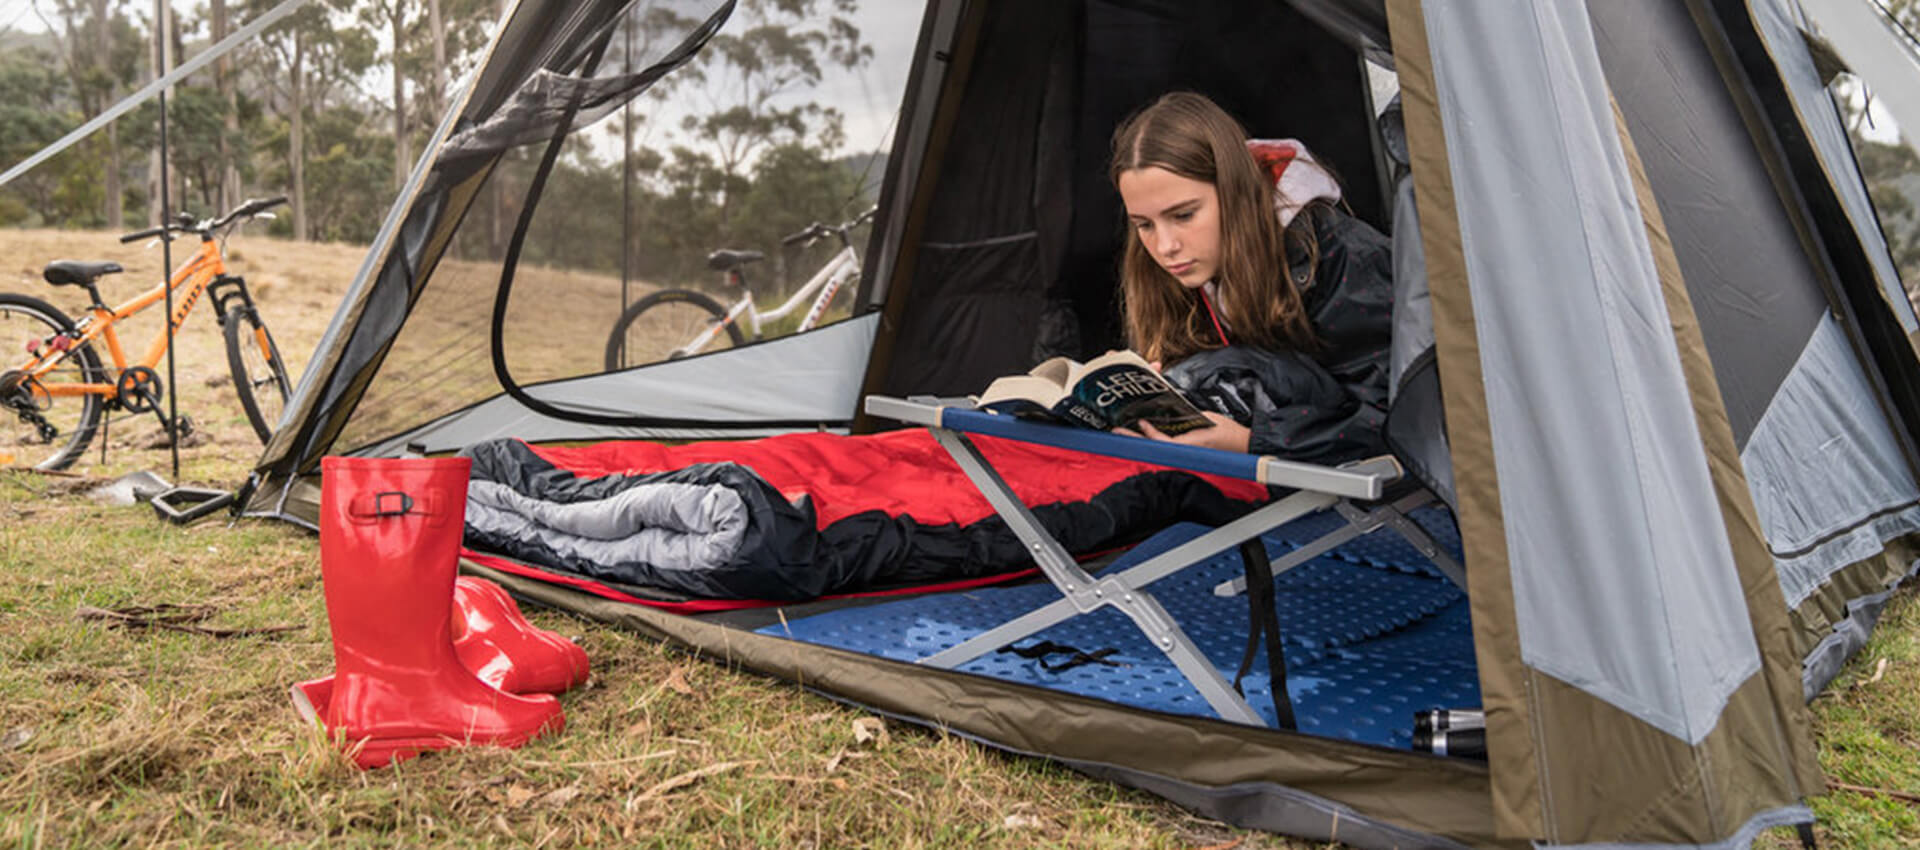 Girl reading on a fold-out bed inside a pitched tent